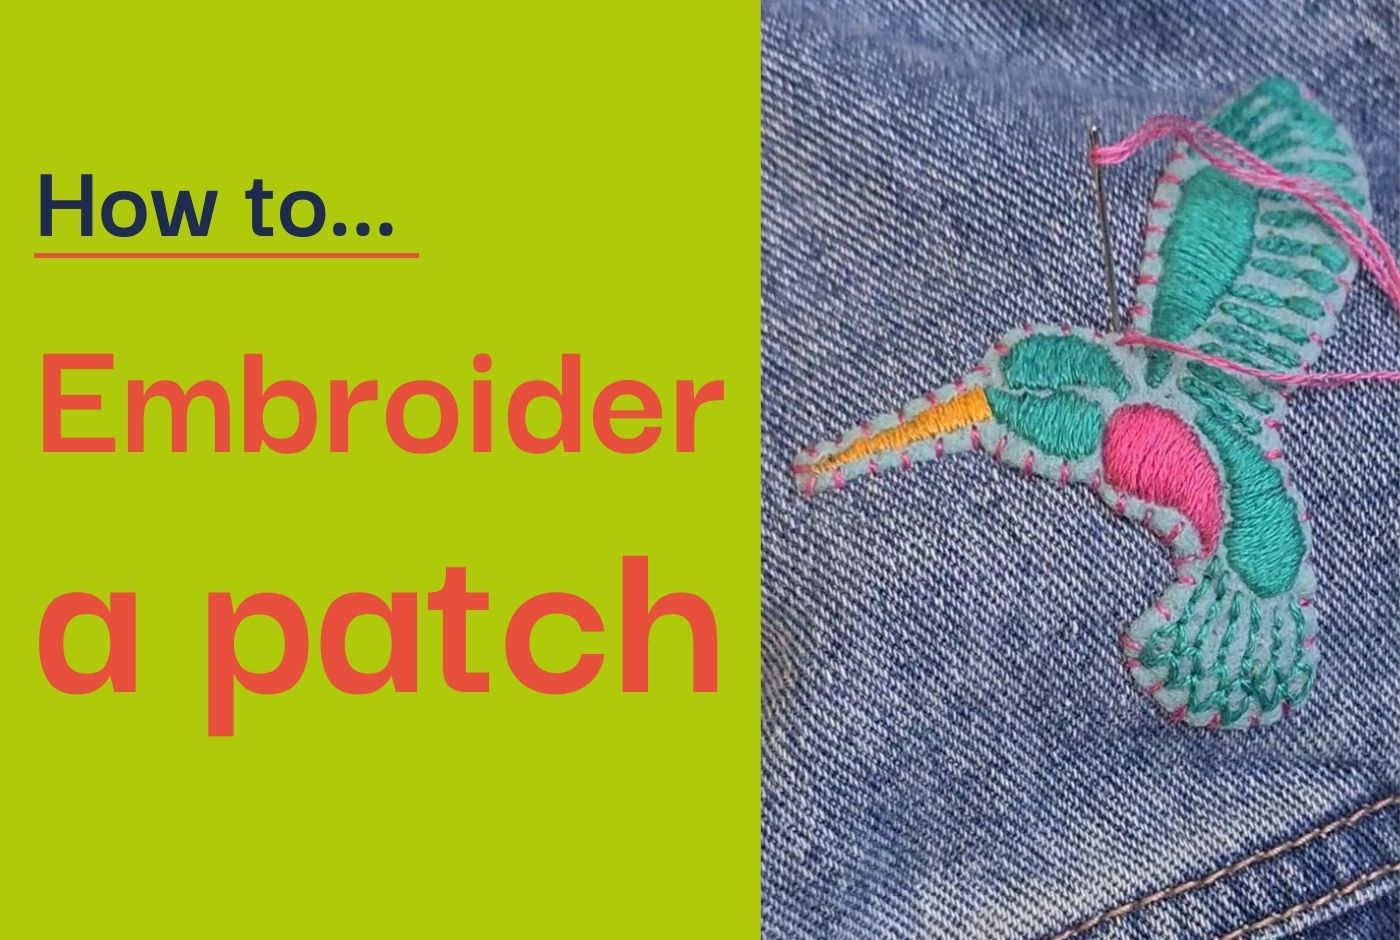 A photo of an embroidered patch with a hummingbird design, stitched on a denim jacket.